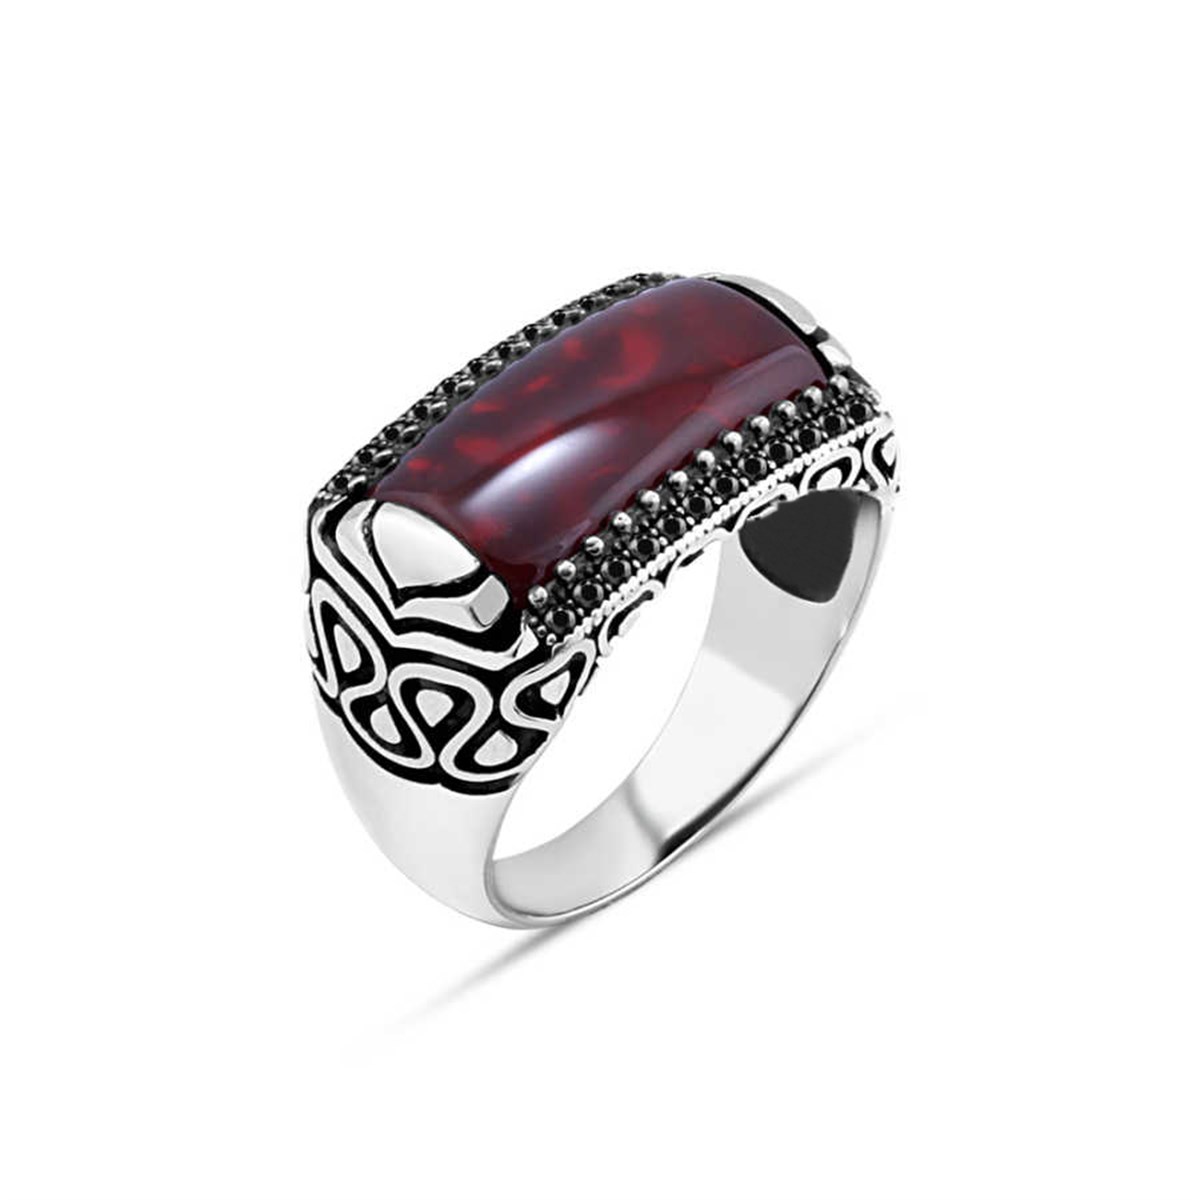 Agate Stone Sides Tiny Black Zircon Stone Sterling Silver Men's Ring